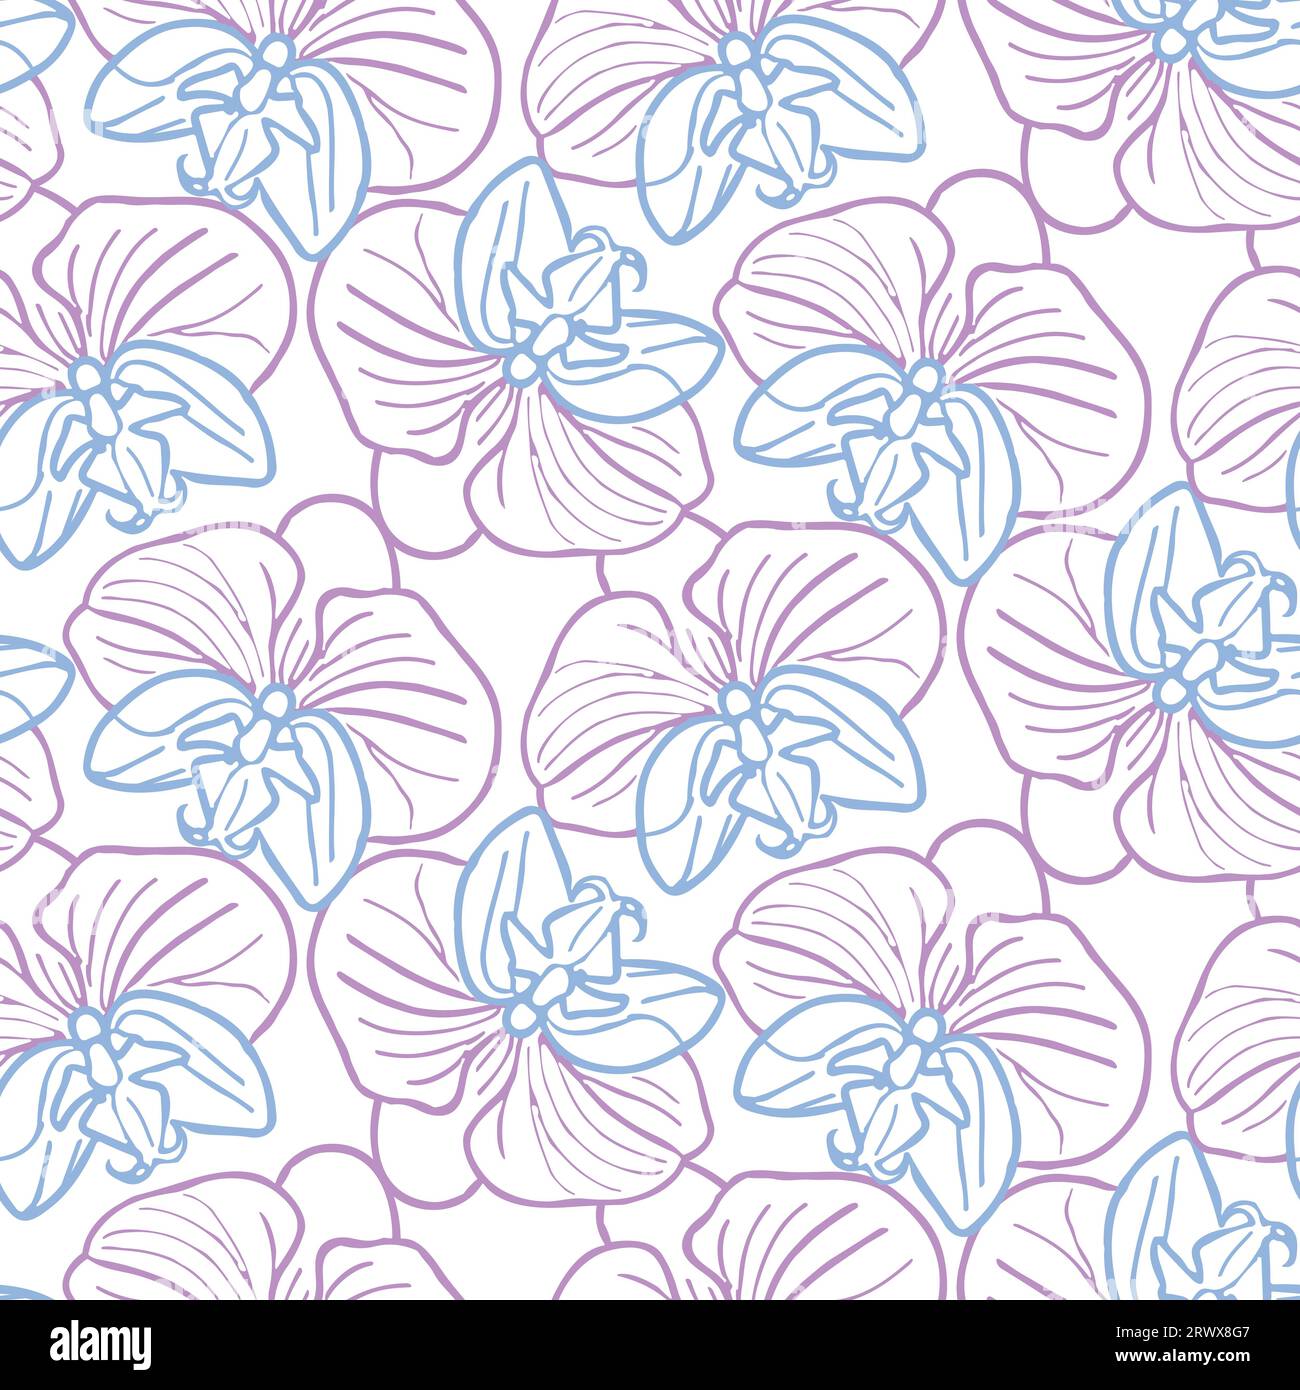 Tropical orchid flower seamless pattern, hand drawn sketch flower head in pastel blue and pink color. Vector background for surface design or textile. Stock Vector